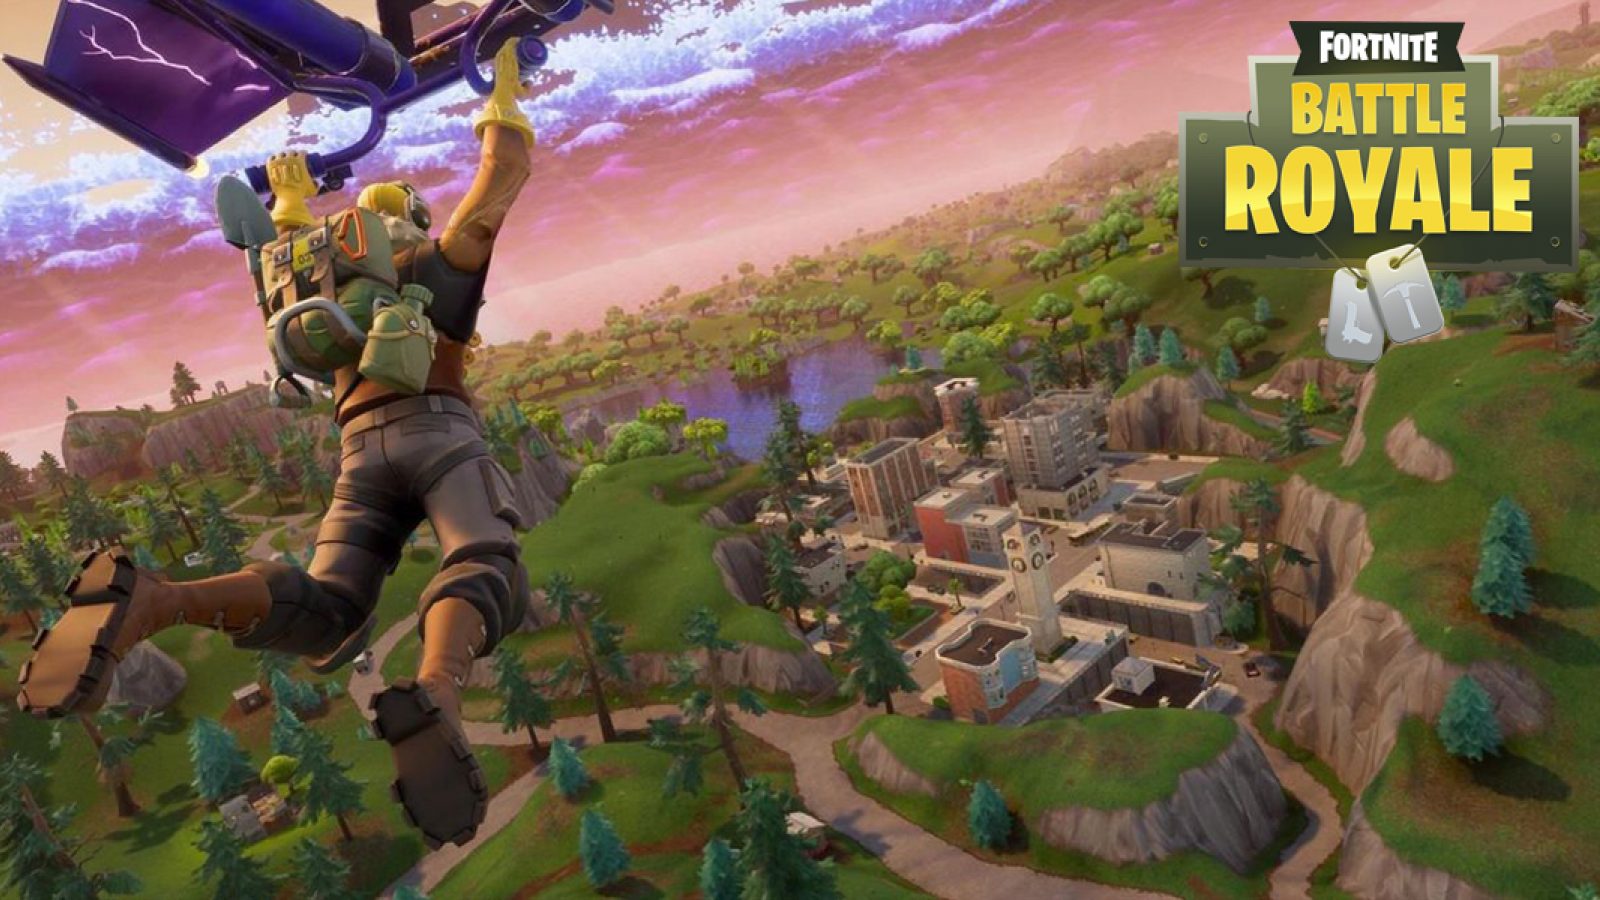 Fortnite Update V5.21 Patch Notes﻿﻿ – Heavy Sniper Introduced and Mini-Gun  Nerf - Dexerto